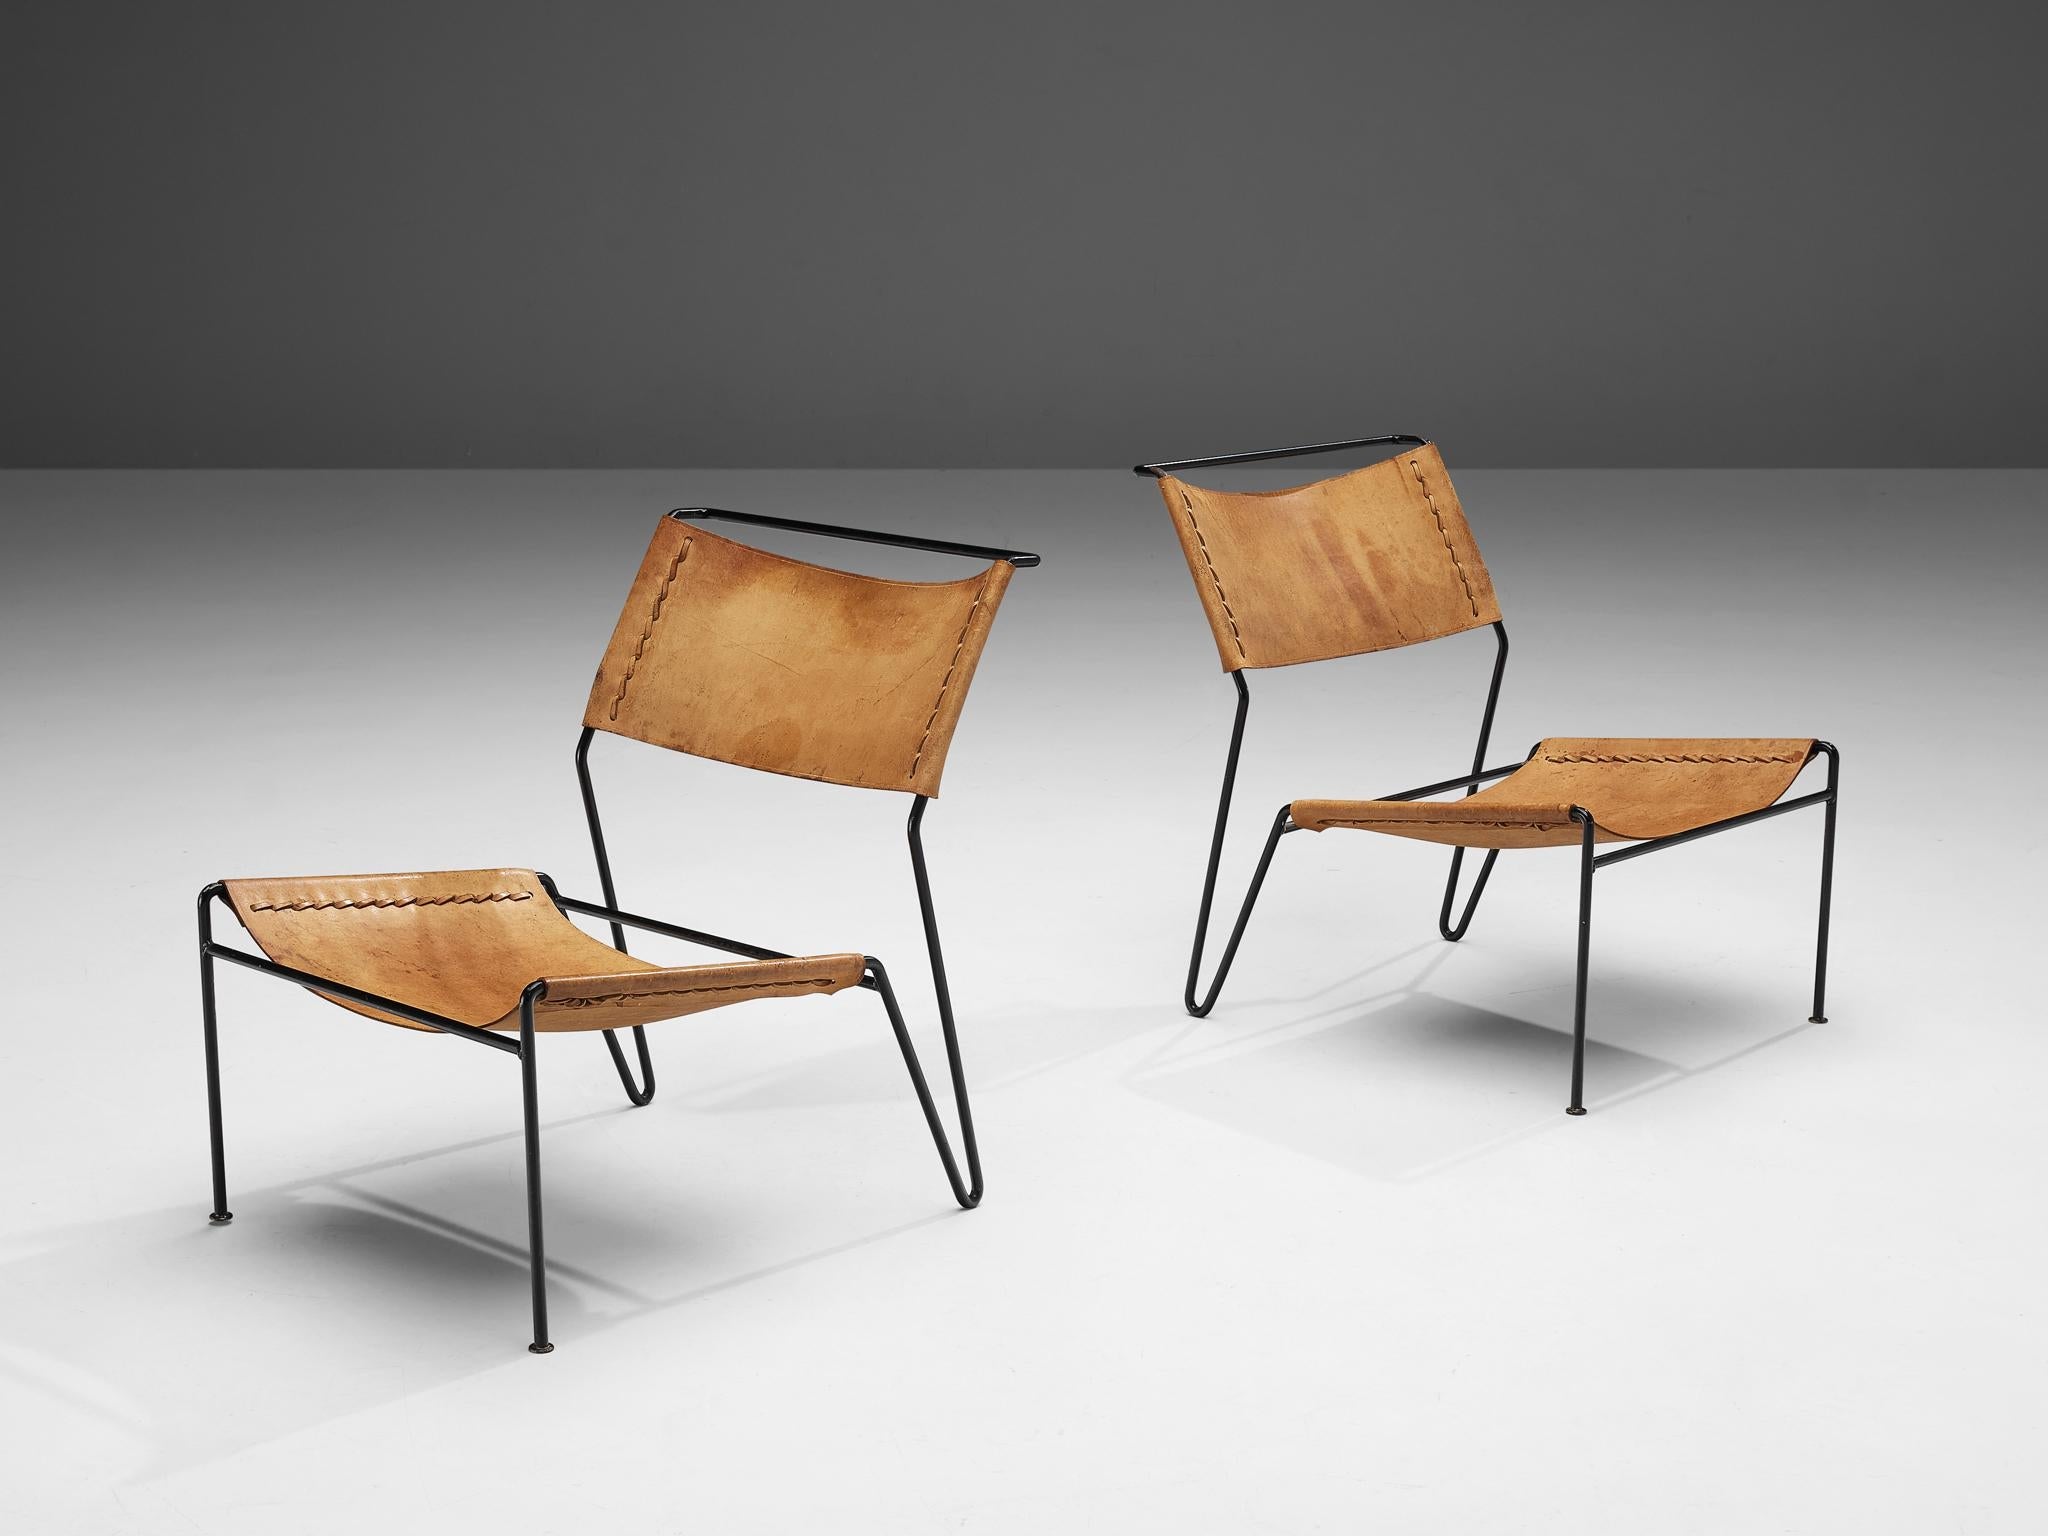 A. Dolleman for Metz & Co Pair of Modernist Easy Chairs in Leather